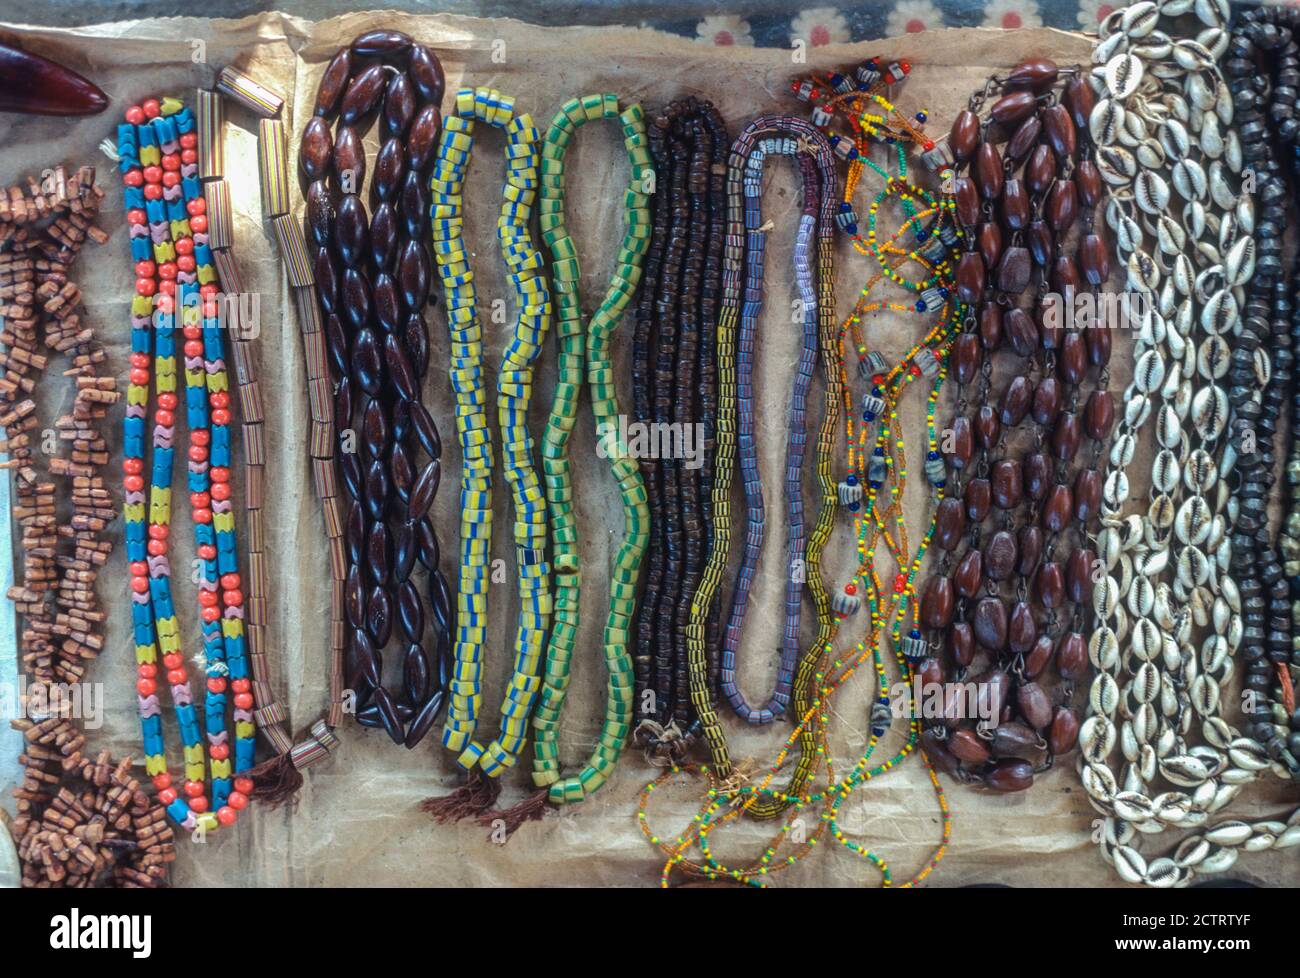 Victoria, Cameroon. Bead Necklaces for Sale in the Market. Stock Photo